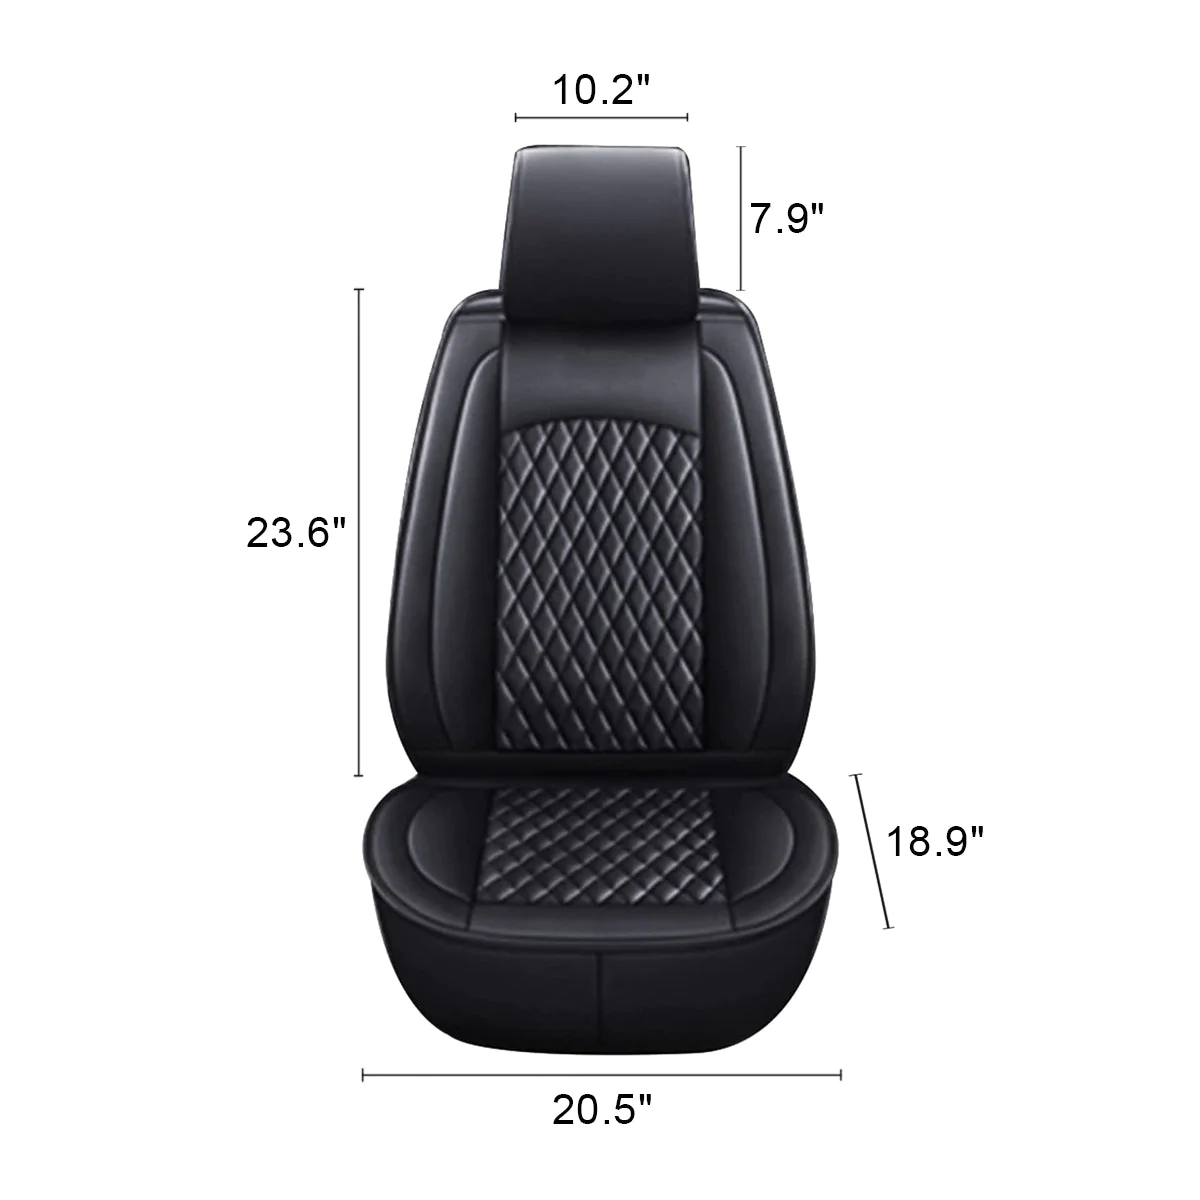 Custom Text For Seat Covers 5 Seats Full Set, Custom Fit For Your Cars, Leatherette Automotive Seat Cushion Protector Universal Fit, Vehicle Auto Interior Decor CH13988